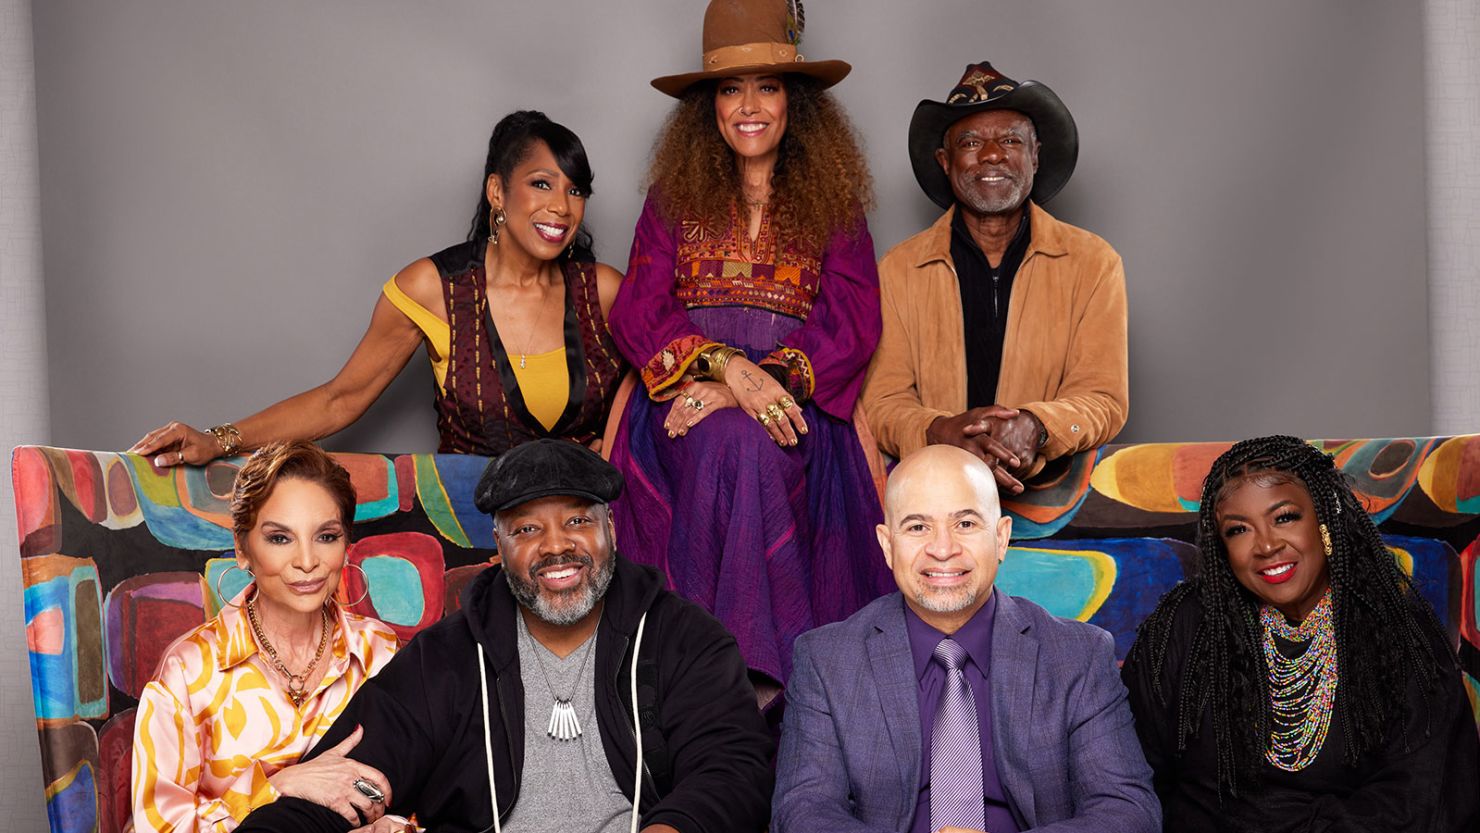 The cast of 'A Different World' has reunited after 35 years to visit HBCUs and fund scholarships.